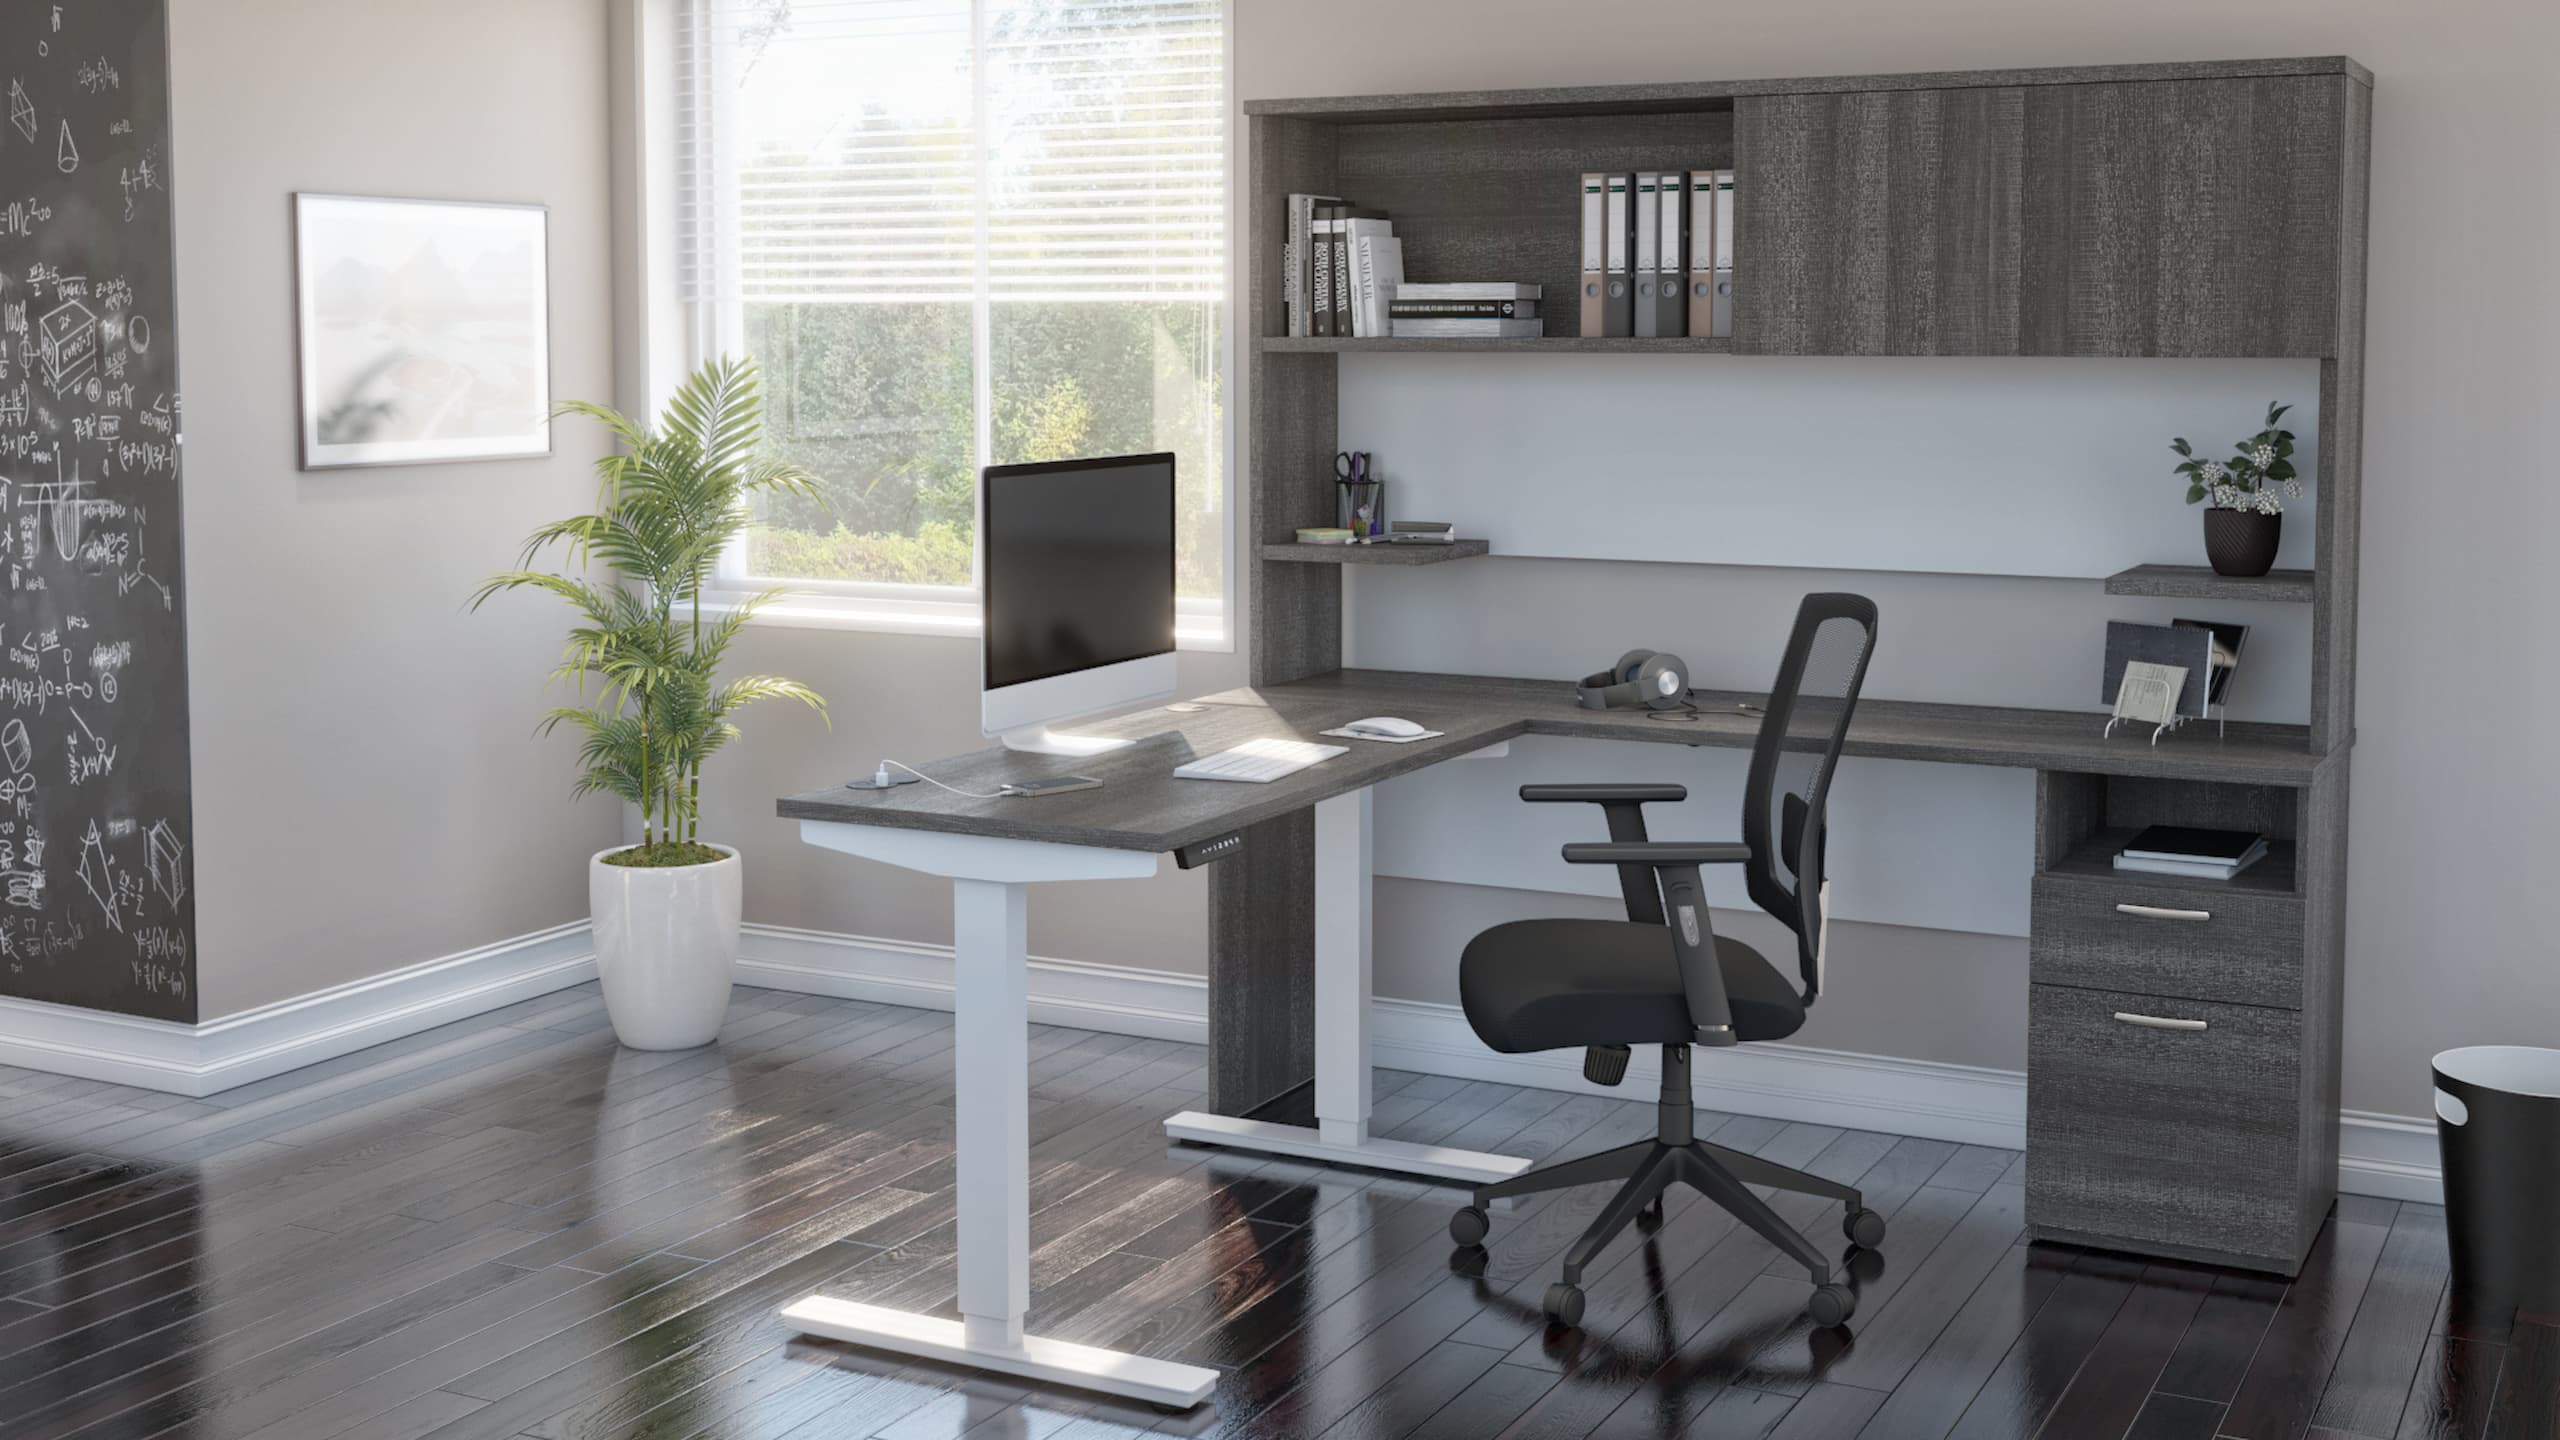 Home office with a stylish L shaped standing desk